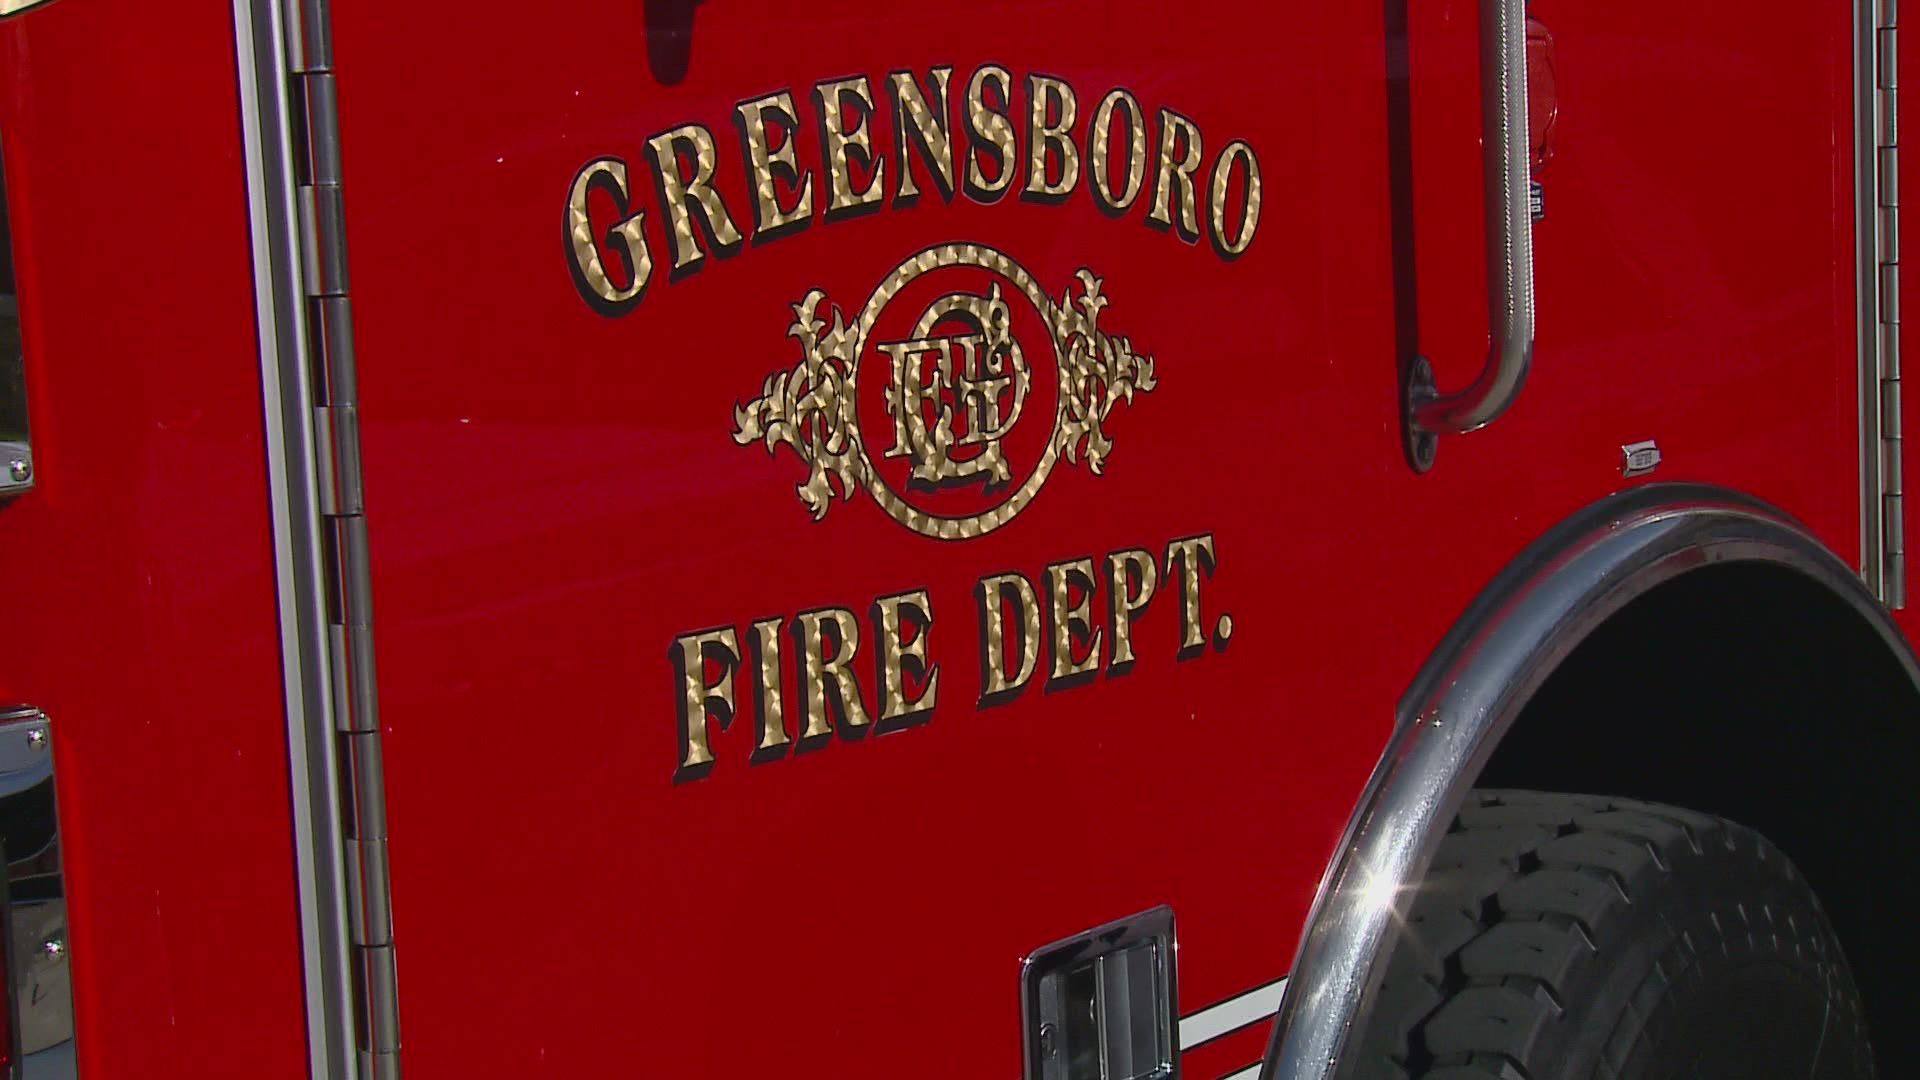 Greensboro City Council council members approve increasing the starting pay for firefighters and police officers.